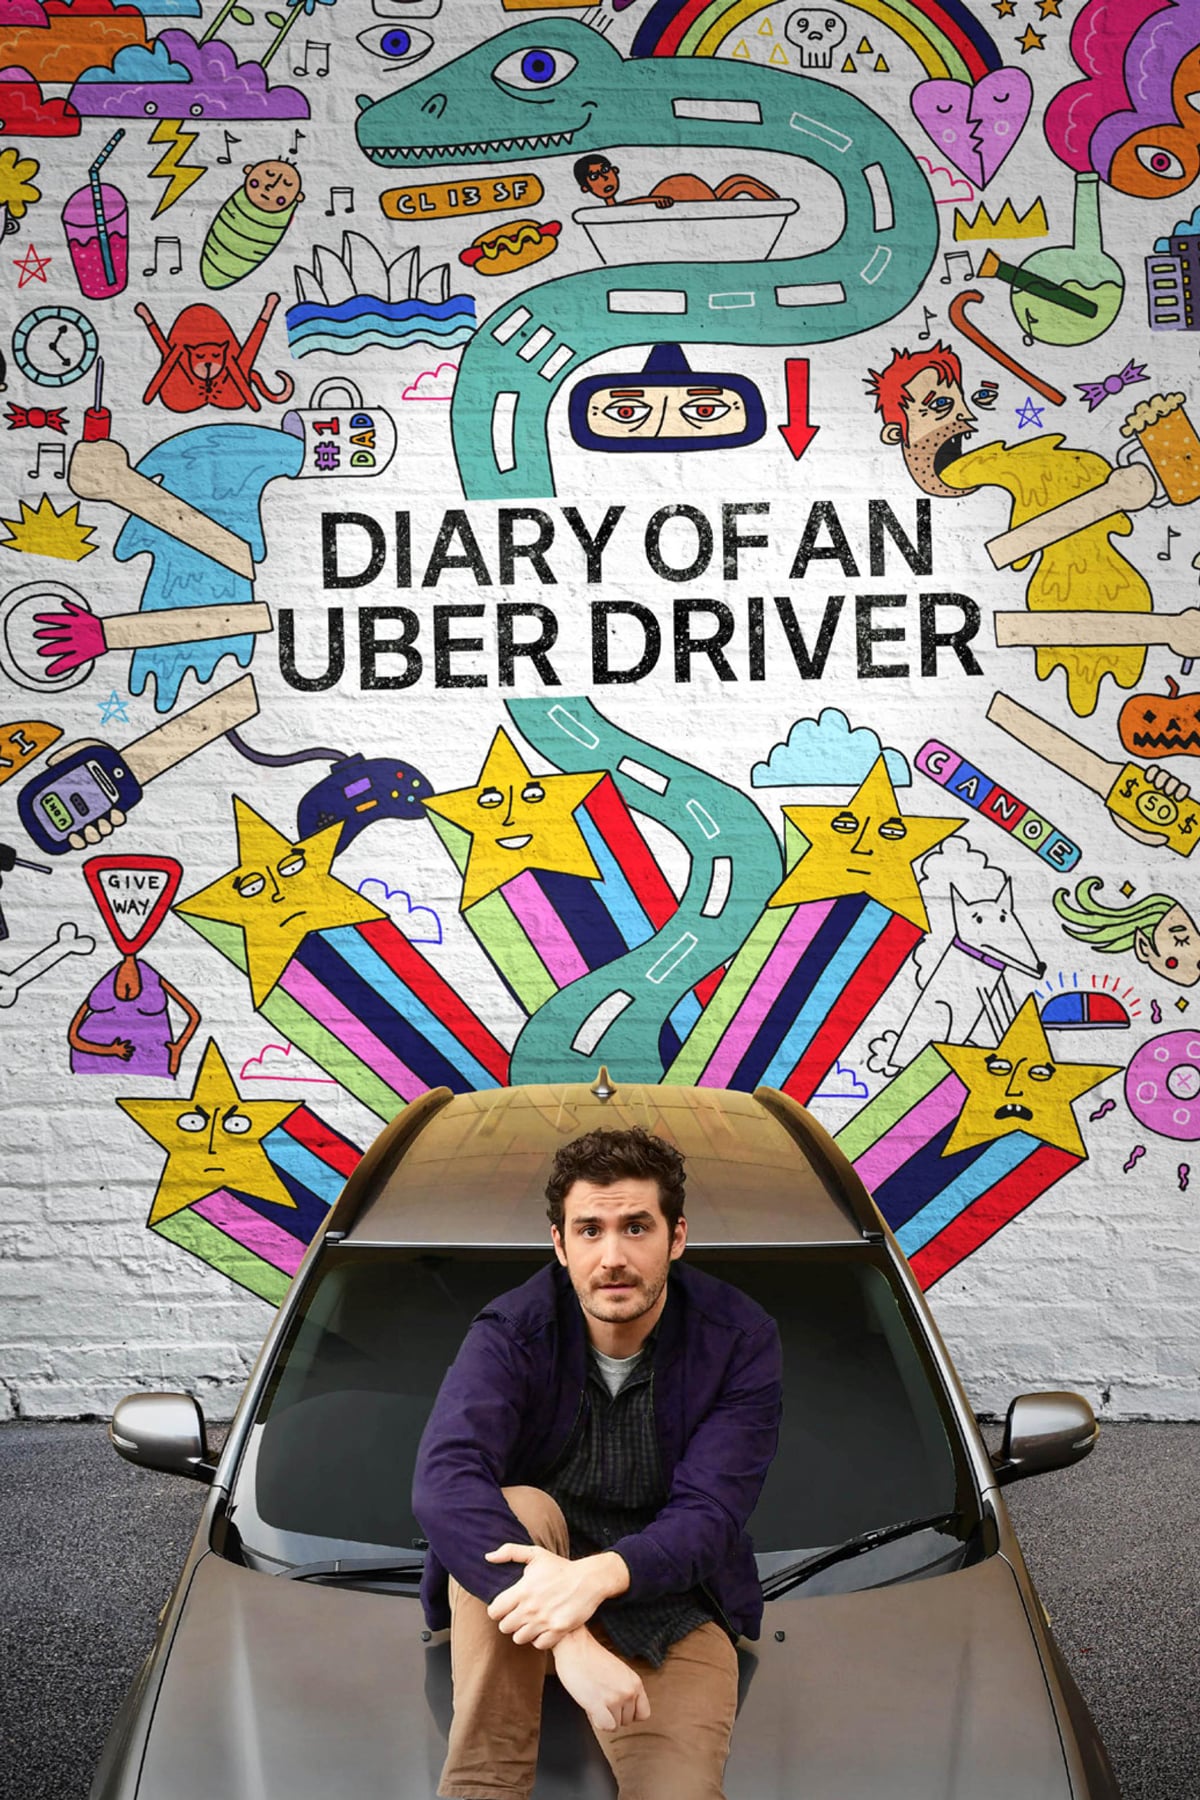 Diary of an Uber Driver rating